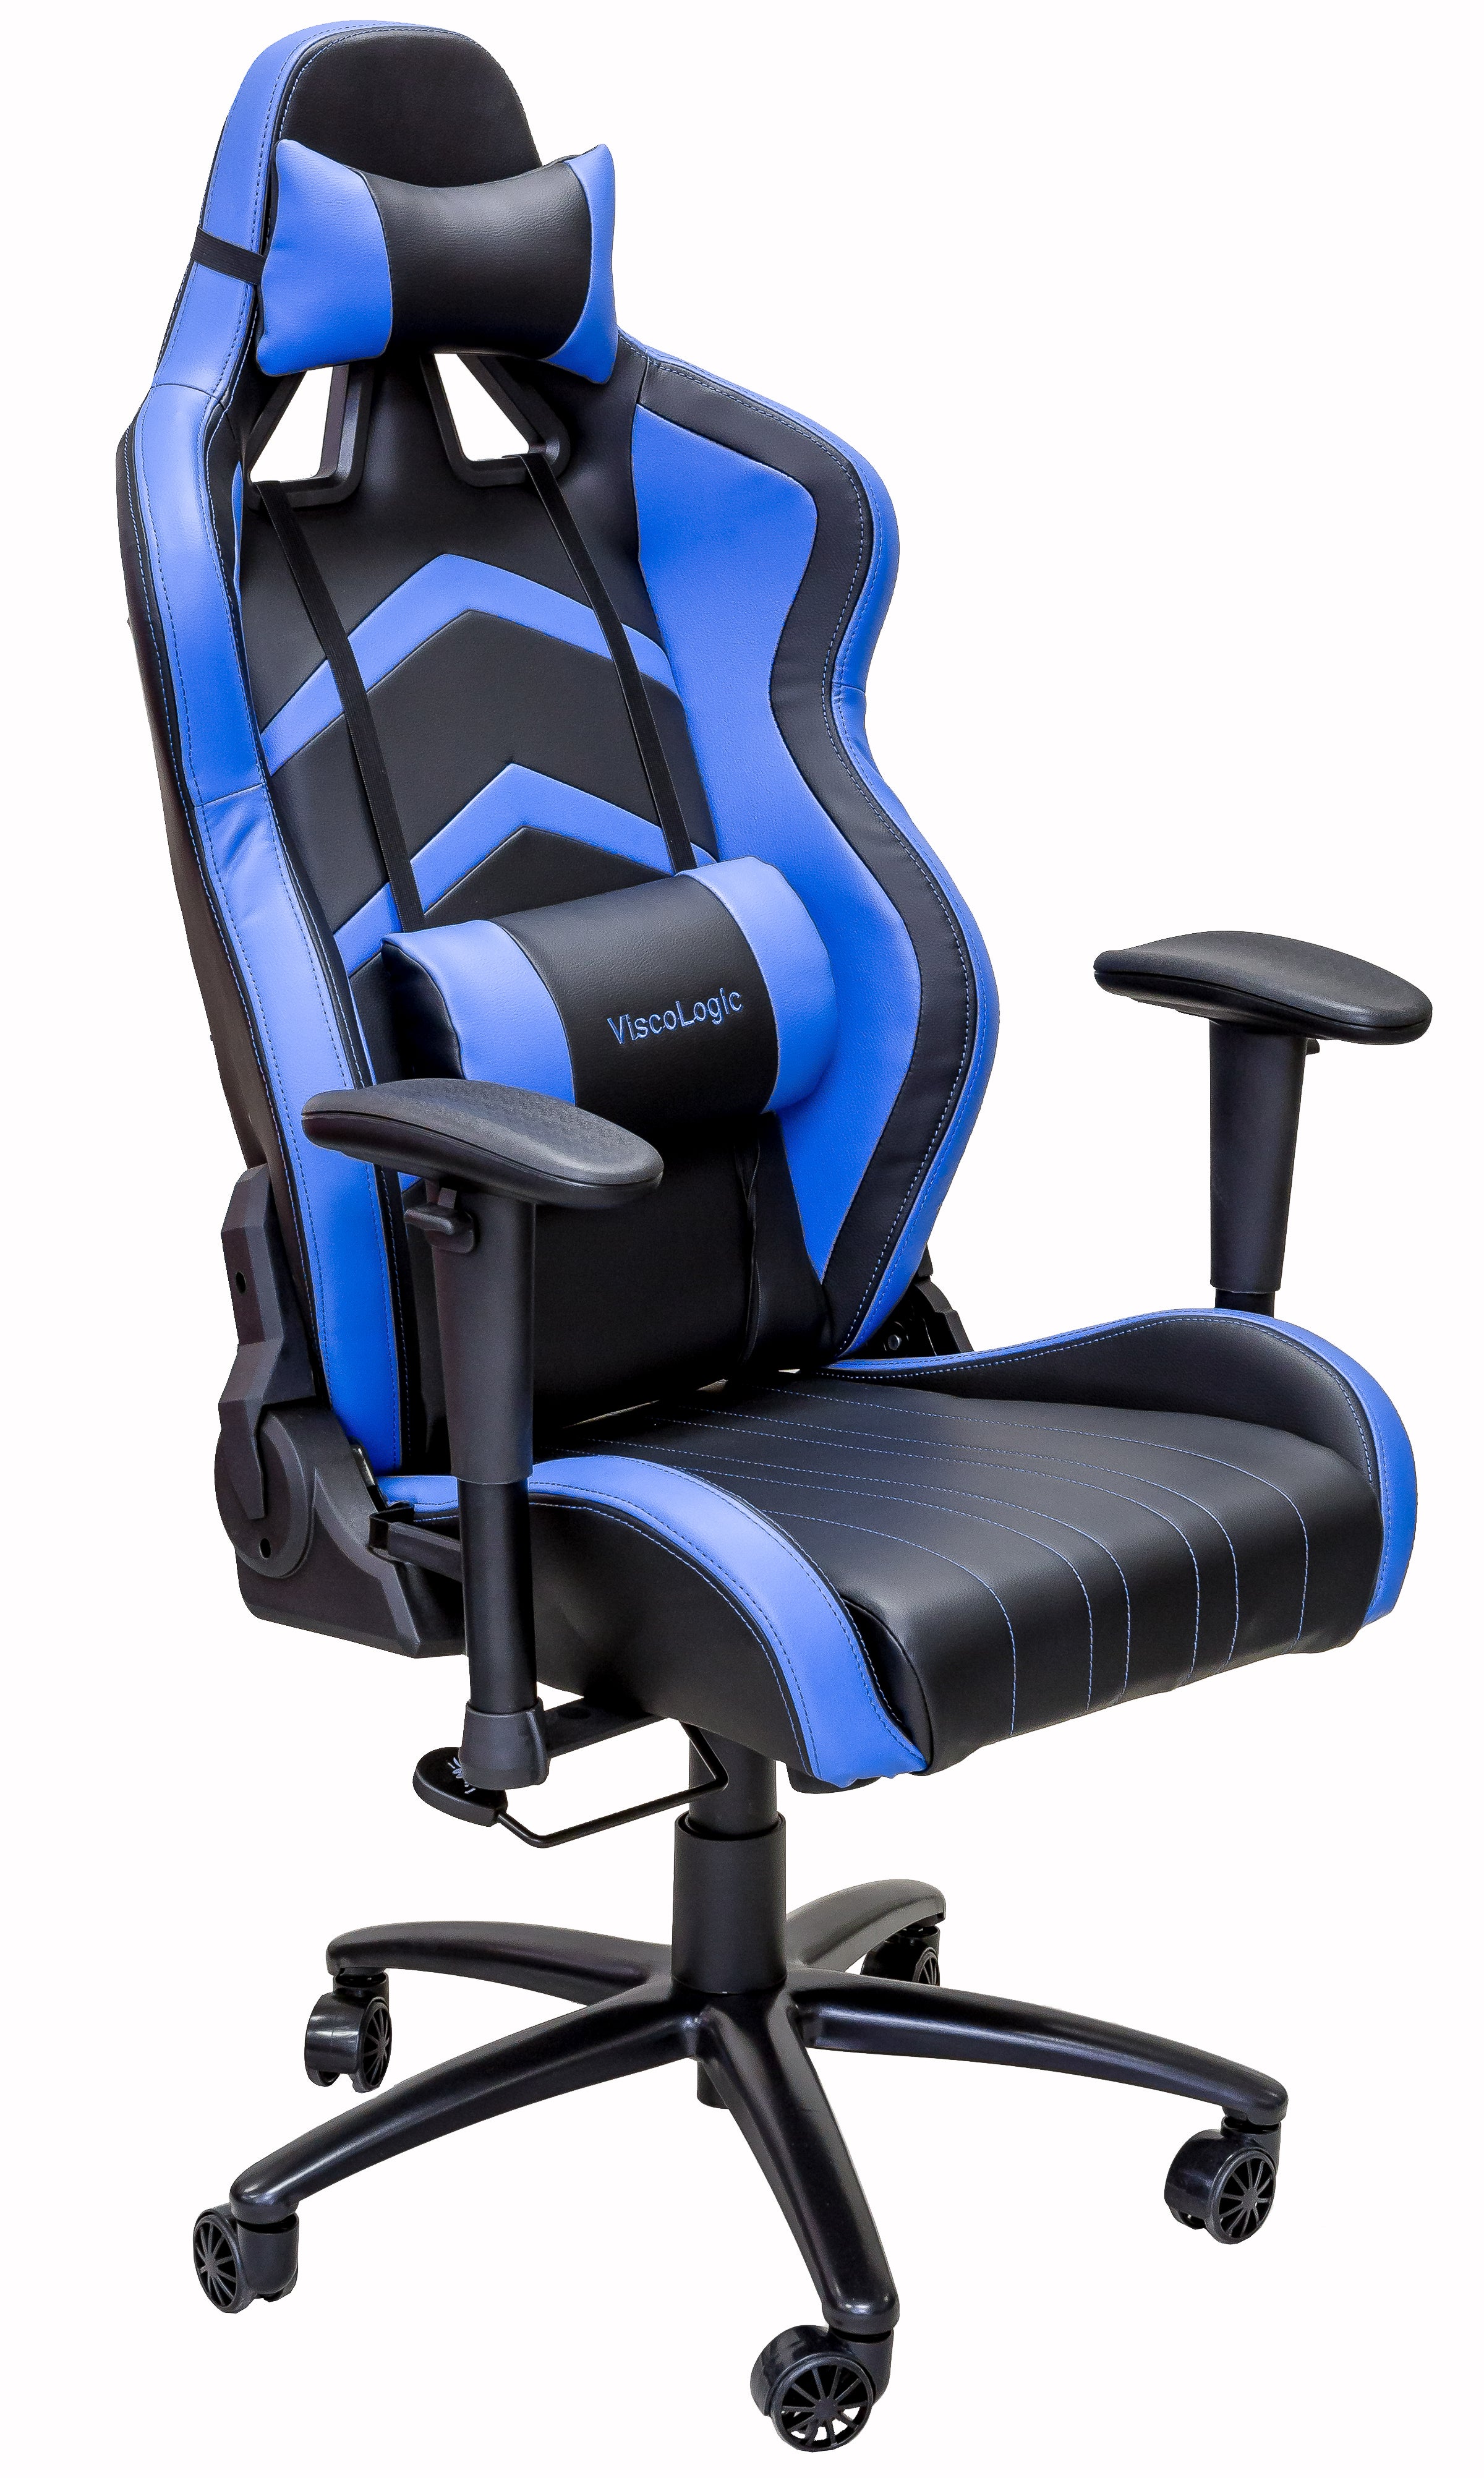 ViscoLogic  LC 600 Gaming Racing Style Swivel Height Adjustable Tilt Lock Home Office Computer Gaming Chair